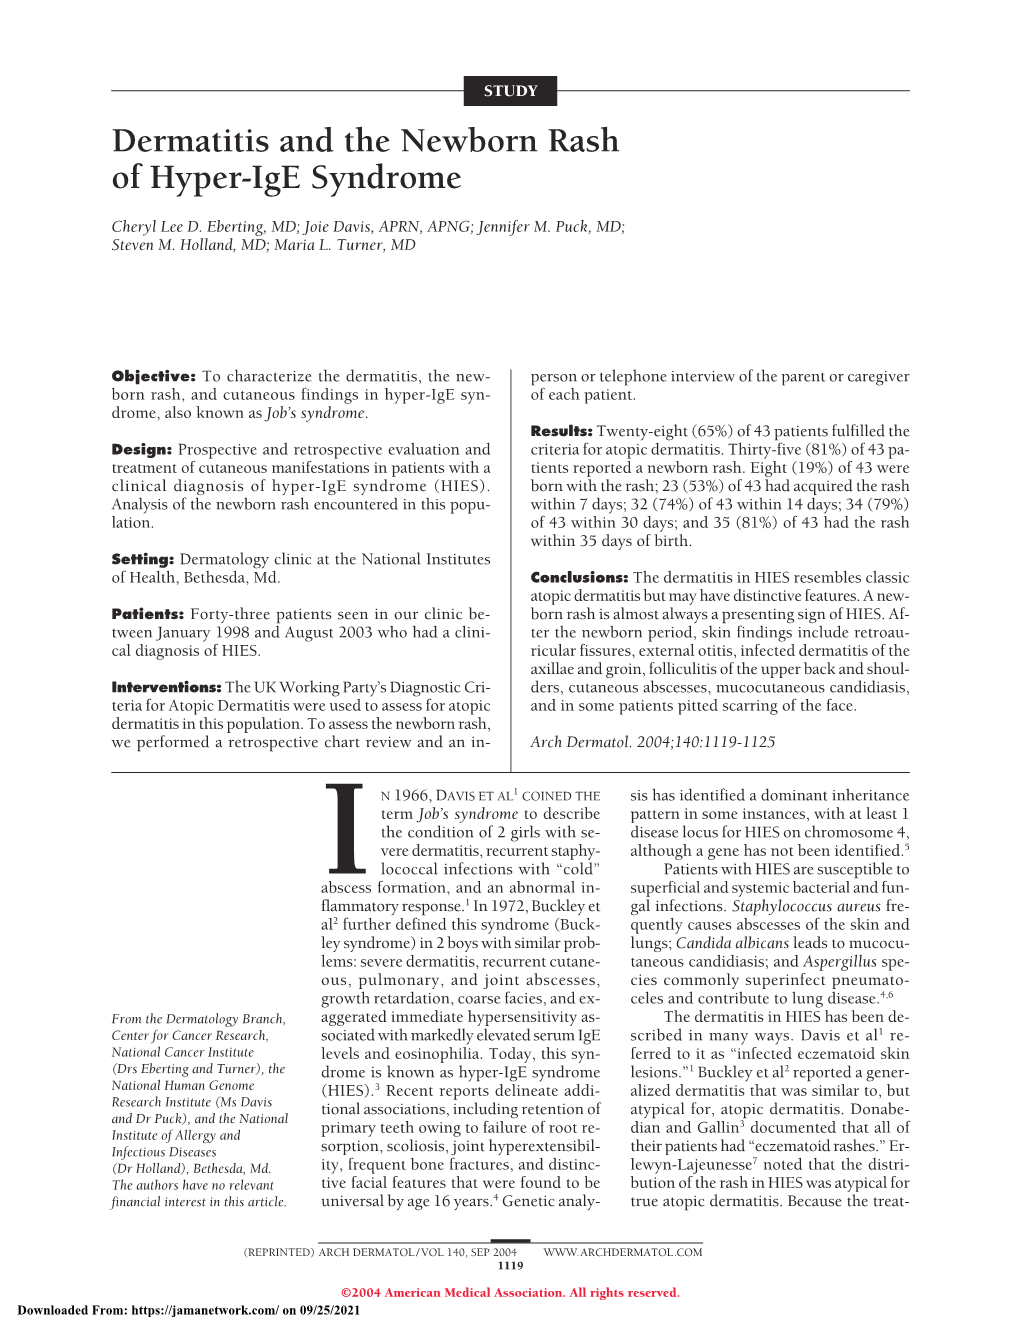 Dermatitis and the Newborn Rash of Hyper-Ige Syndrome